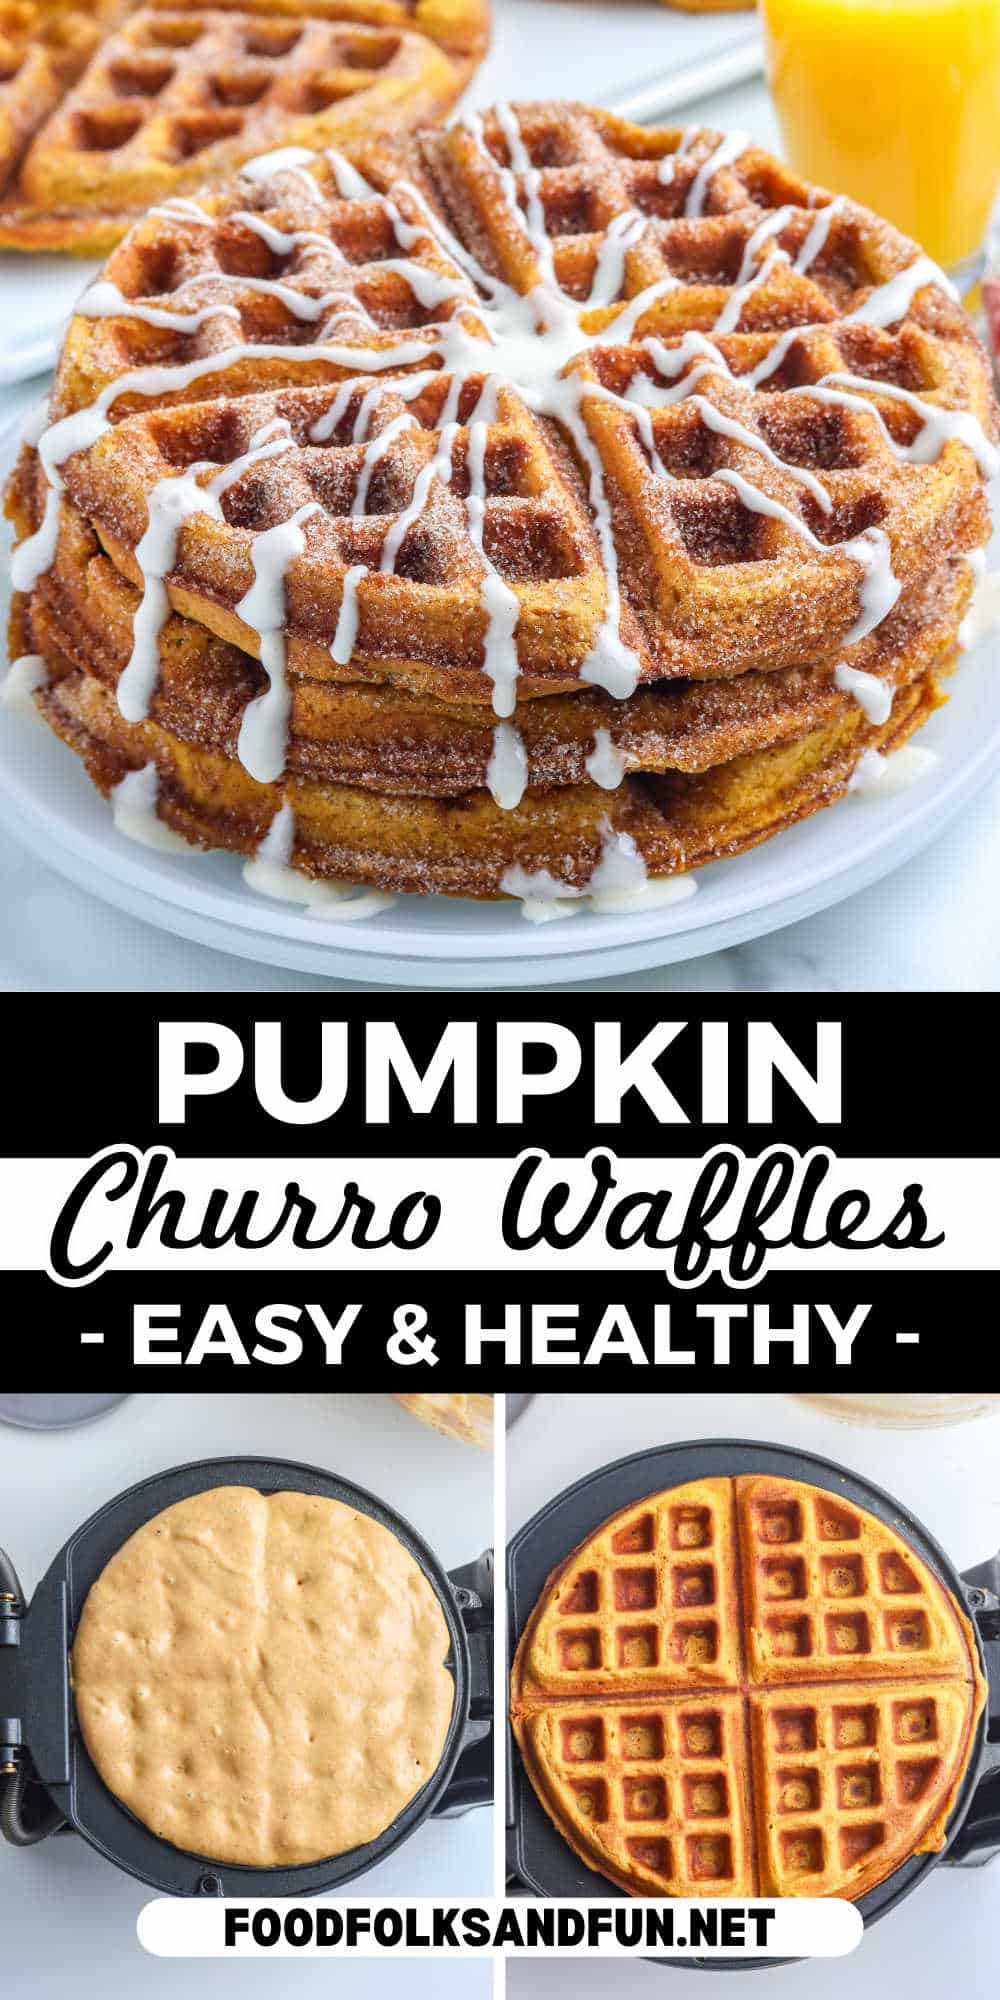 Pumpkin churro waffles are crisp on the outside and creamy on the inside, almost soufflé-like. They’re coated with spiced sugar and drizzled with a cream cheese glaze. via @foodfolksandfun